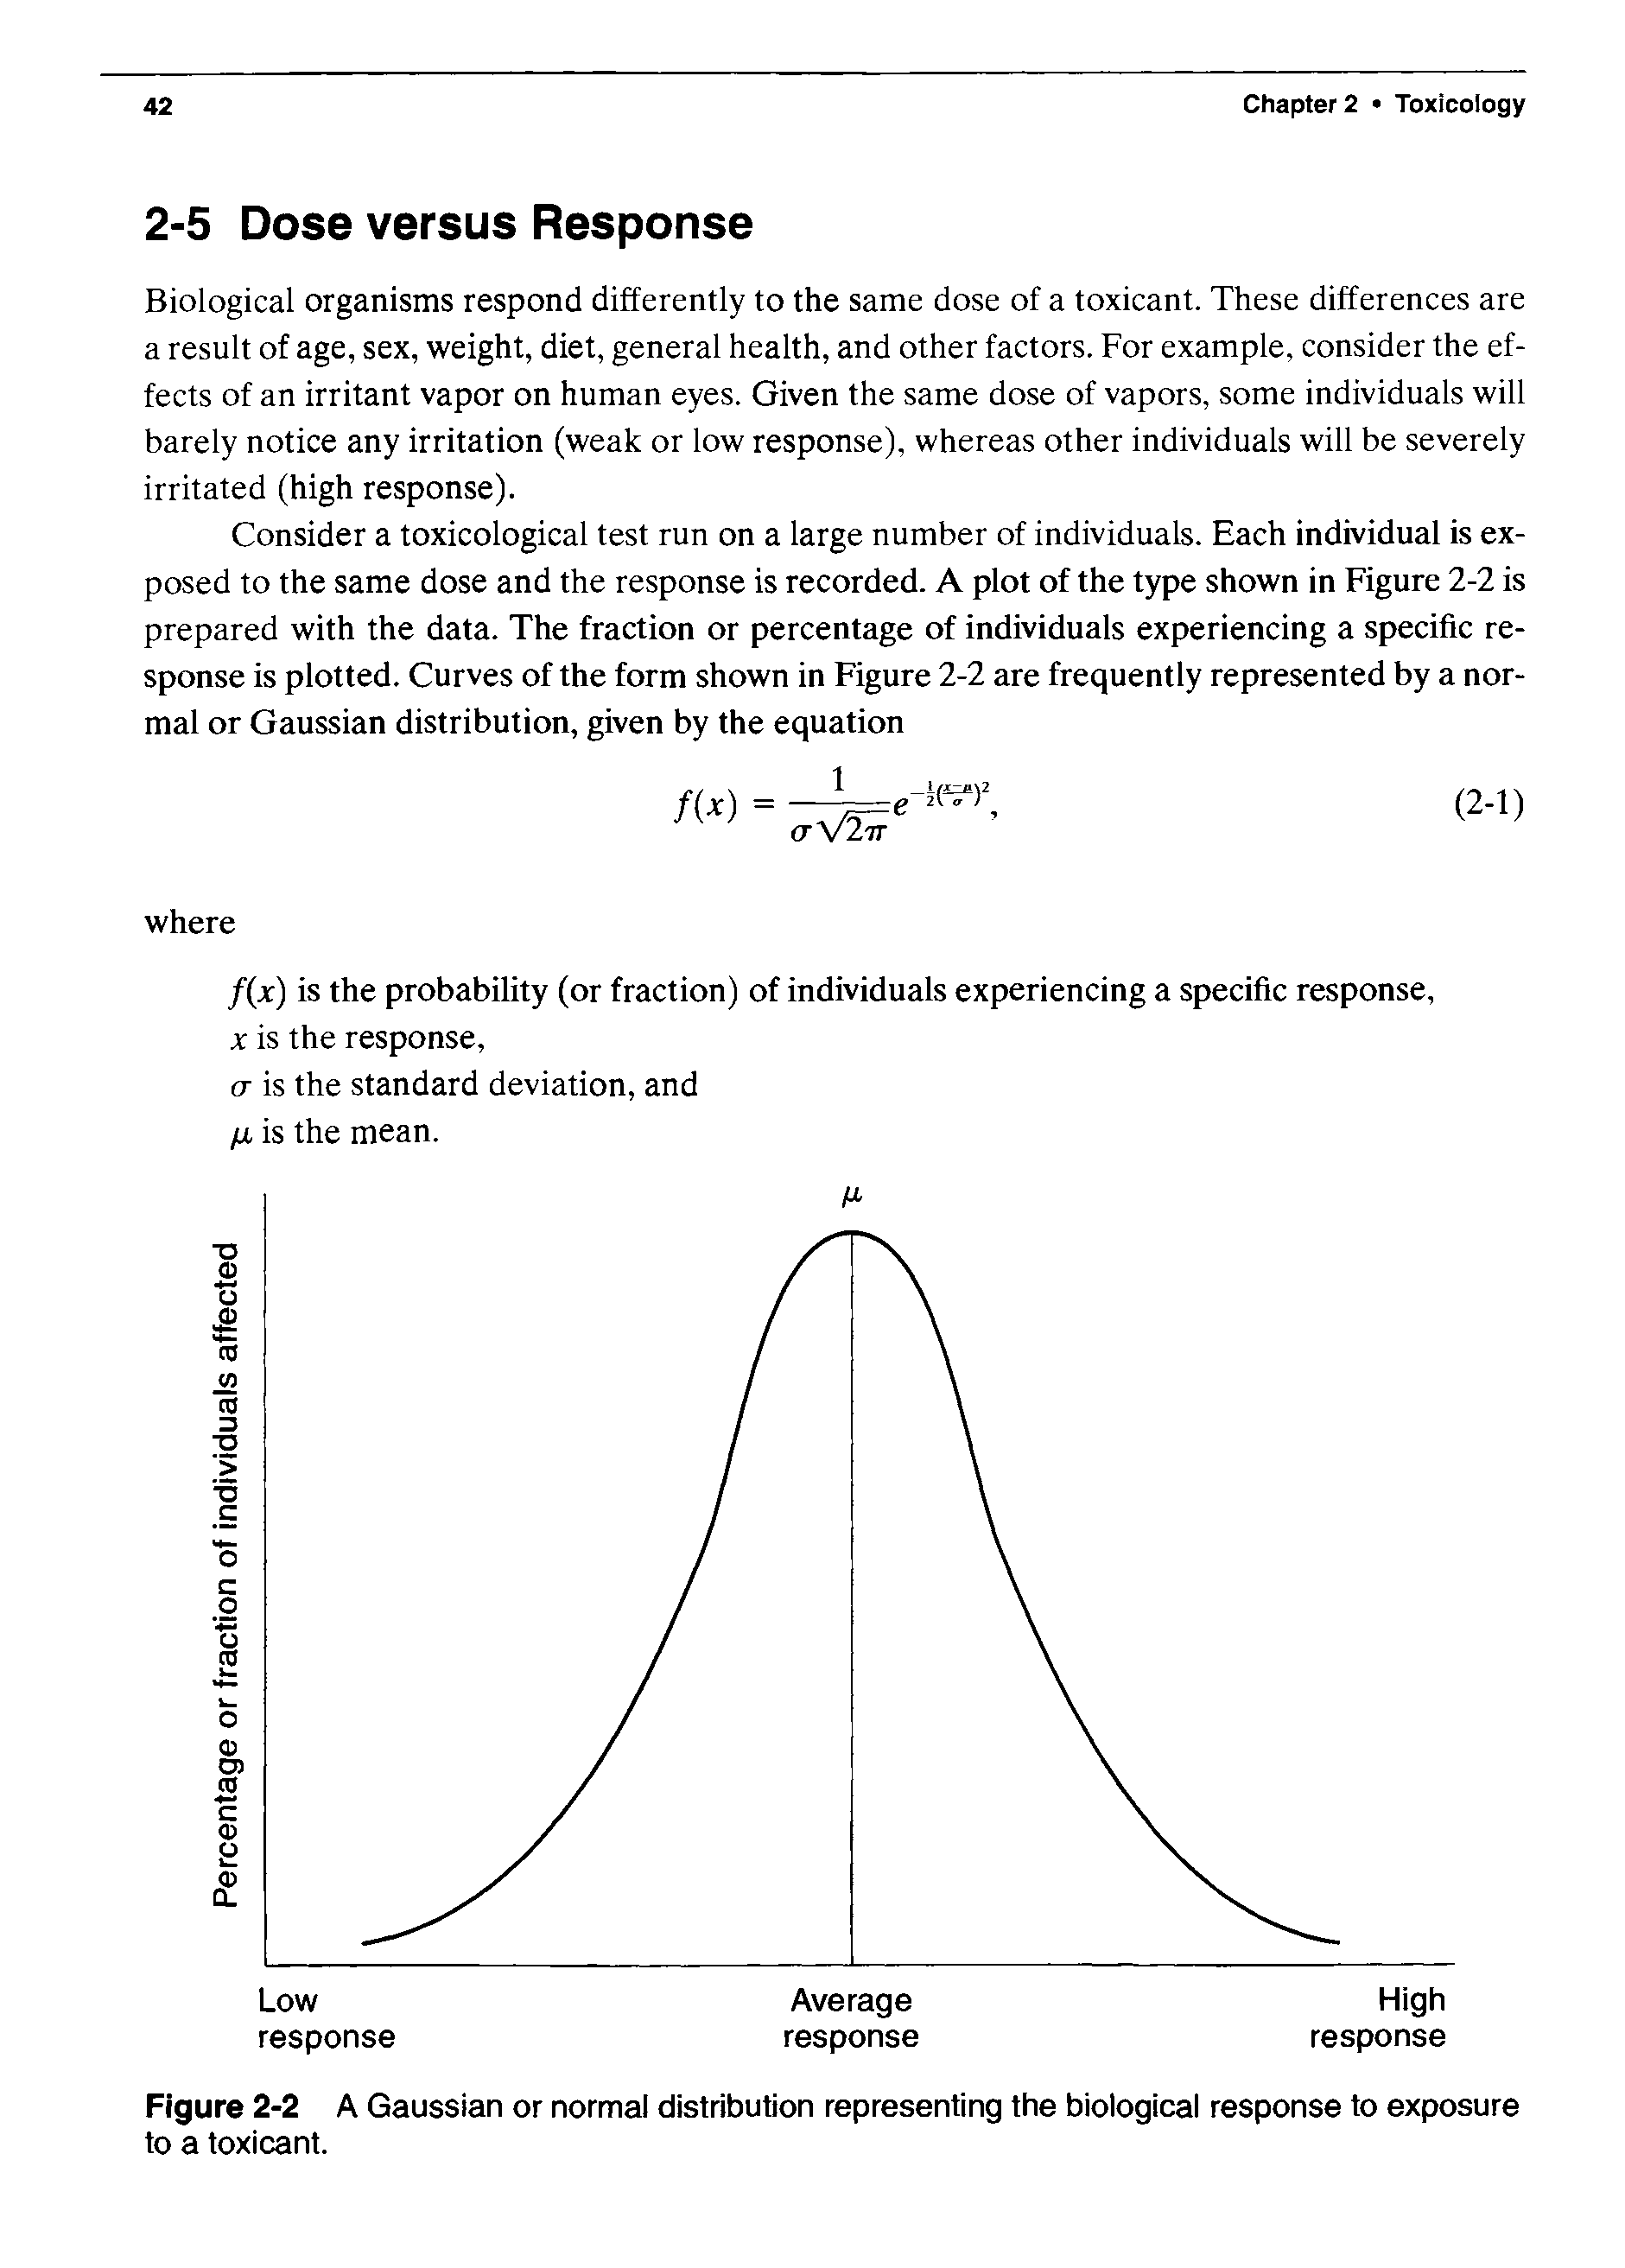 Figure 2-2 A Gaussian or normal distribution representing the biological response to exposure to a toxicant.